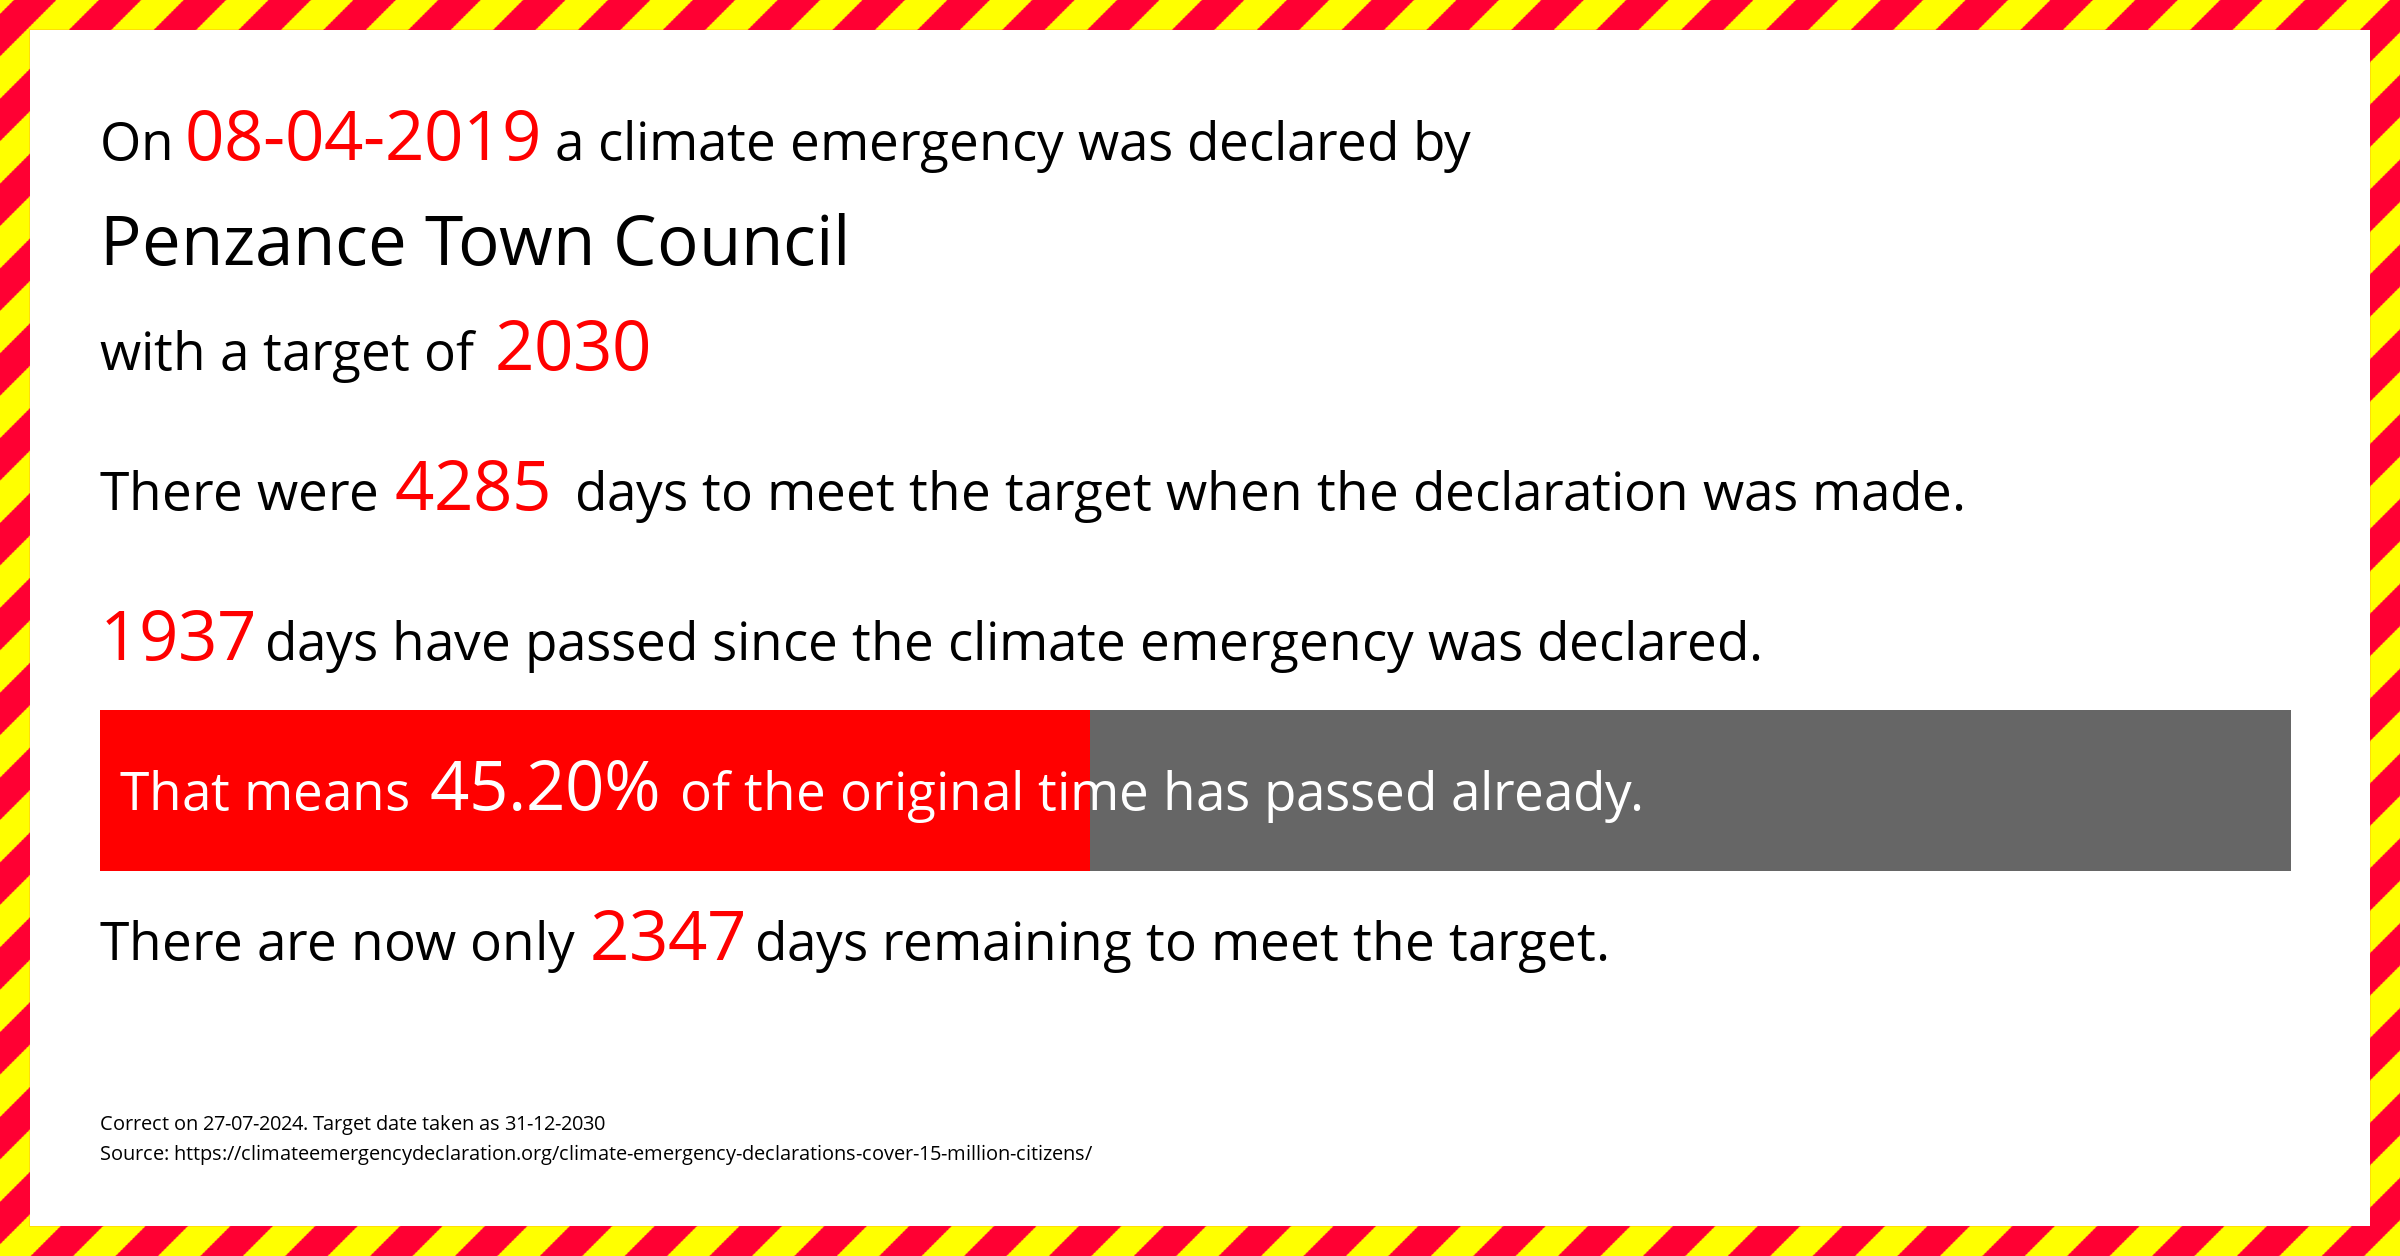 Penzance Town Council declared a Climate emergency on Monday 8th April 2019, with a target of 2030.